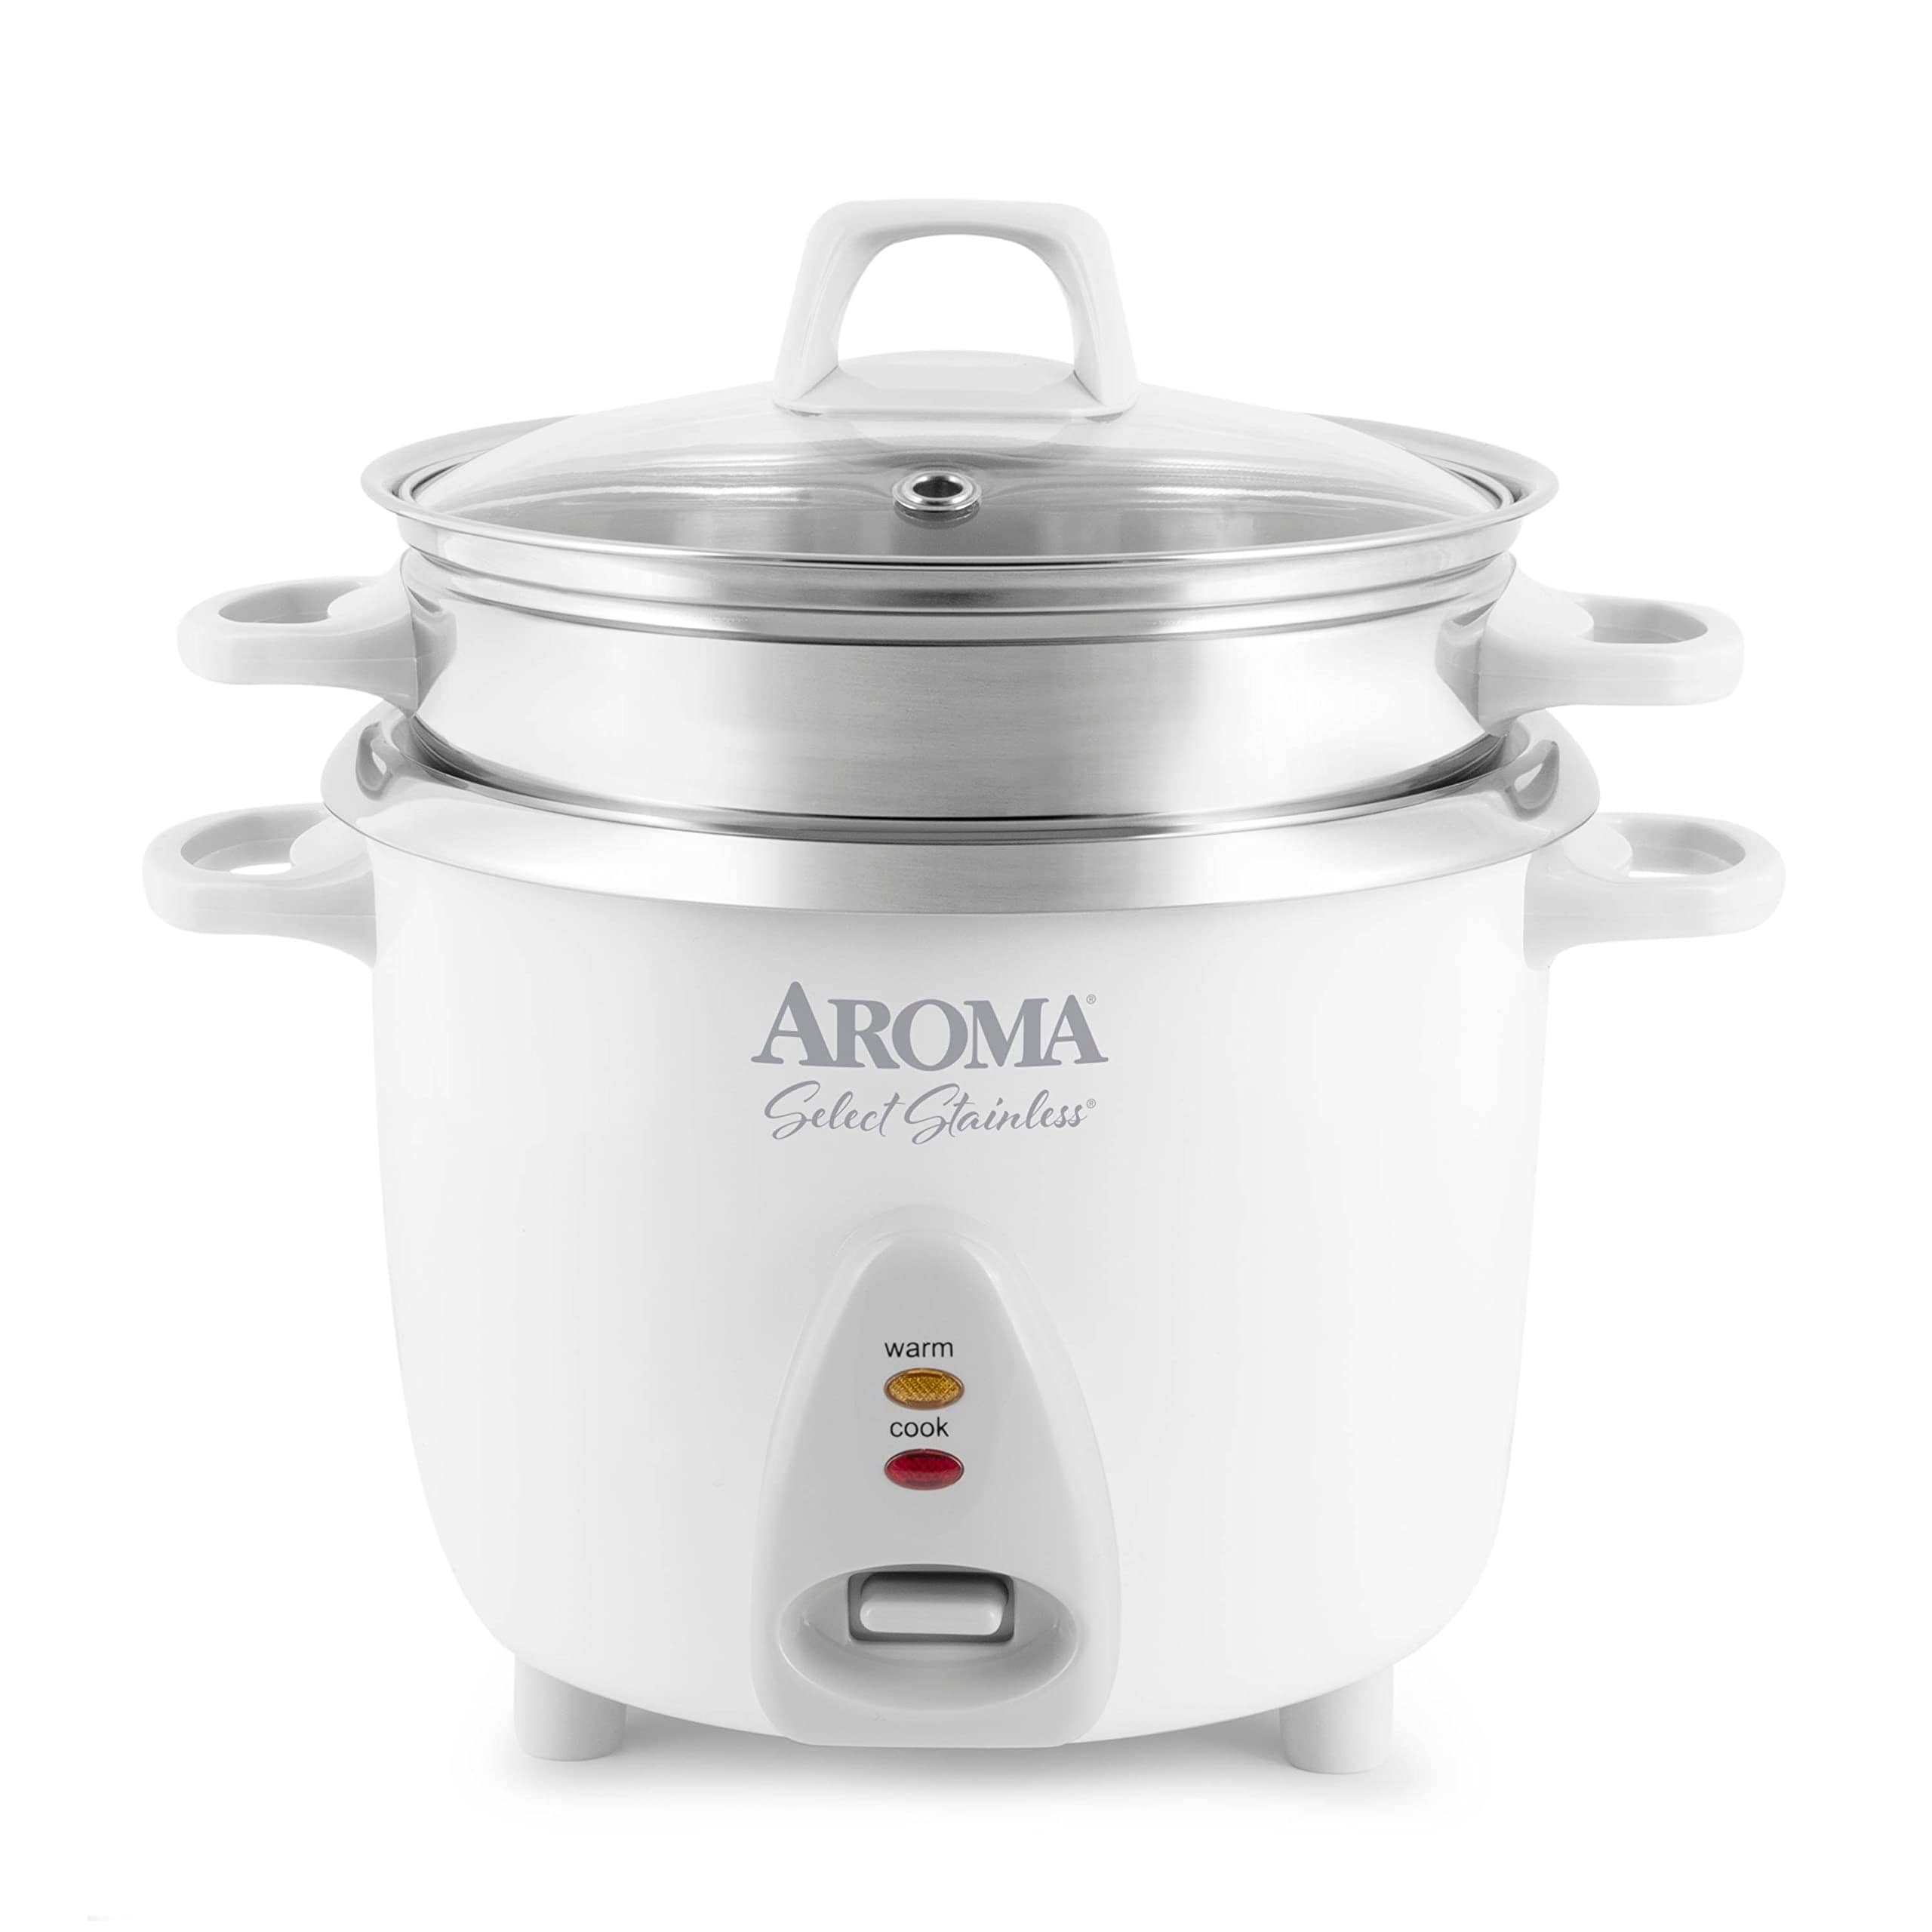 https://ak1.ostkcdn.com/images/products/is/images/direct/ded80caa4e7d6f180fef25525e08ce23e931288b/14-Cup-%28Cooked%29---3Qt.-Select-Stainless-Pot-Style-Rice-Cooker%2C-%26-Food-Steamer%2C-One-Touch-Operation%2C-Automatic-Keep-Warm-Mode.jpg